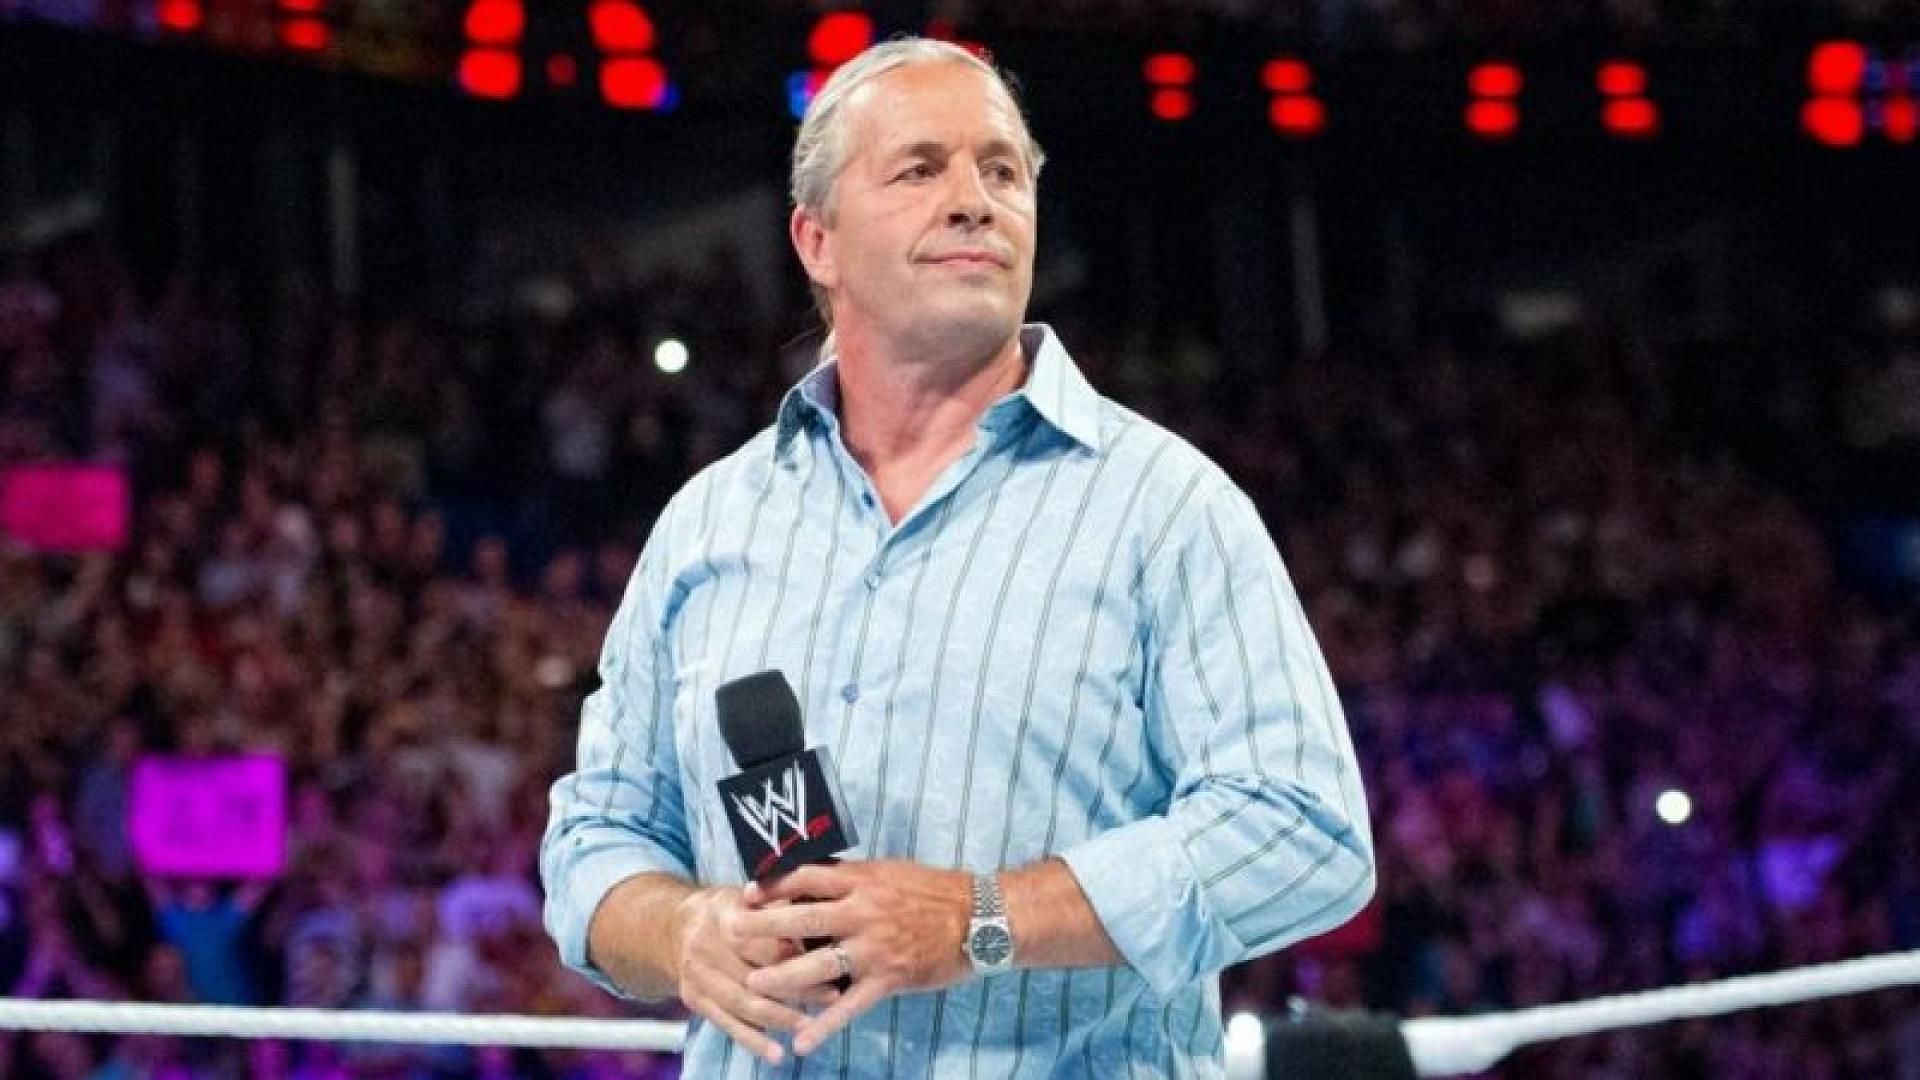 Bret Hart is a WWE Hall of Famer